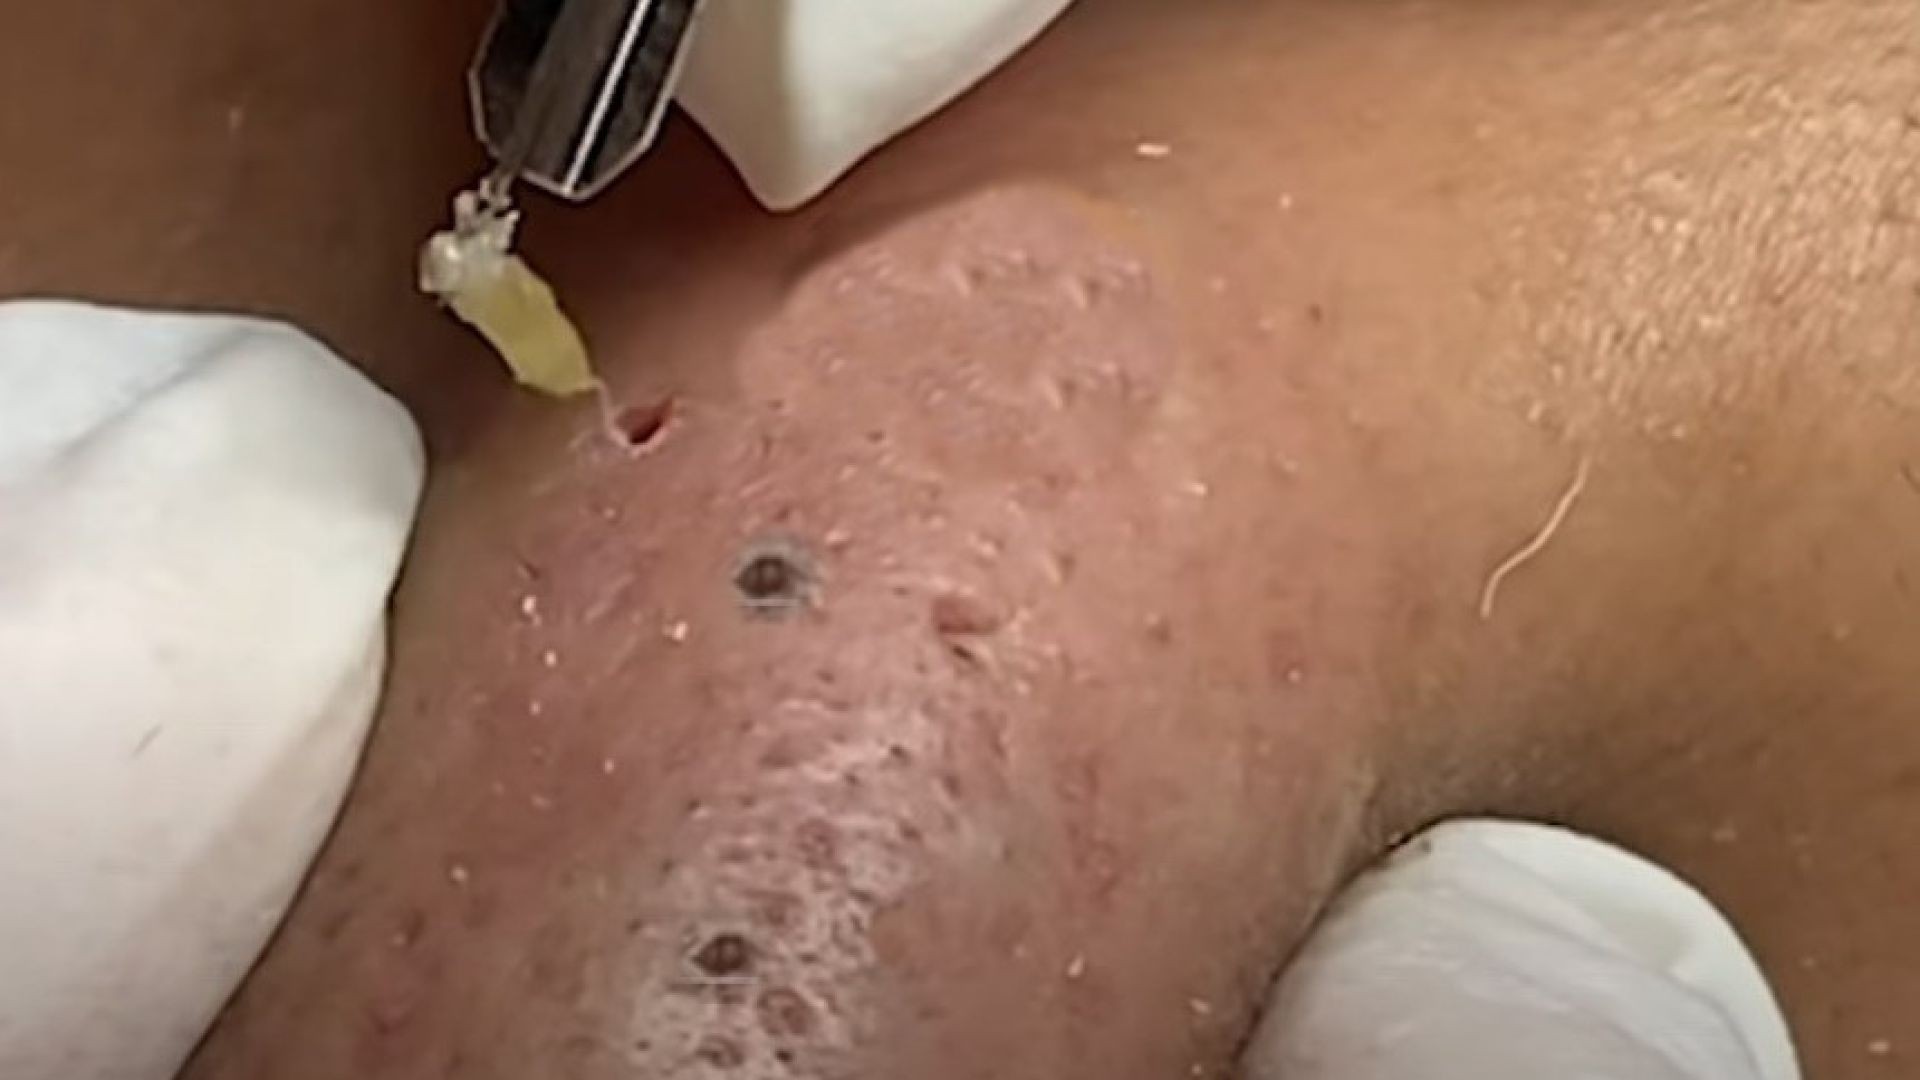 Get SATISFIED with these squeezing big blackheads